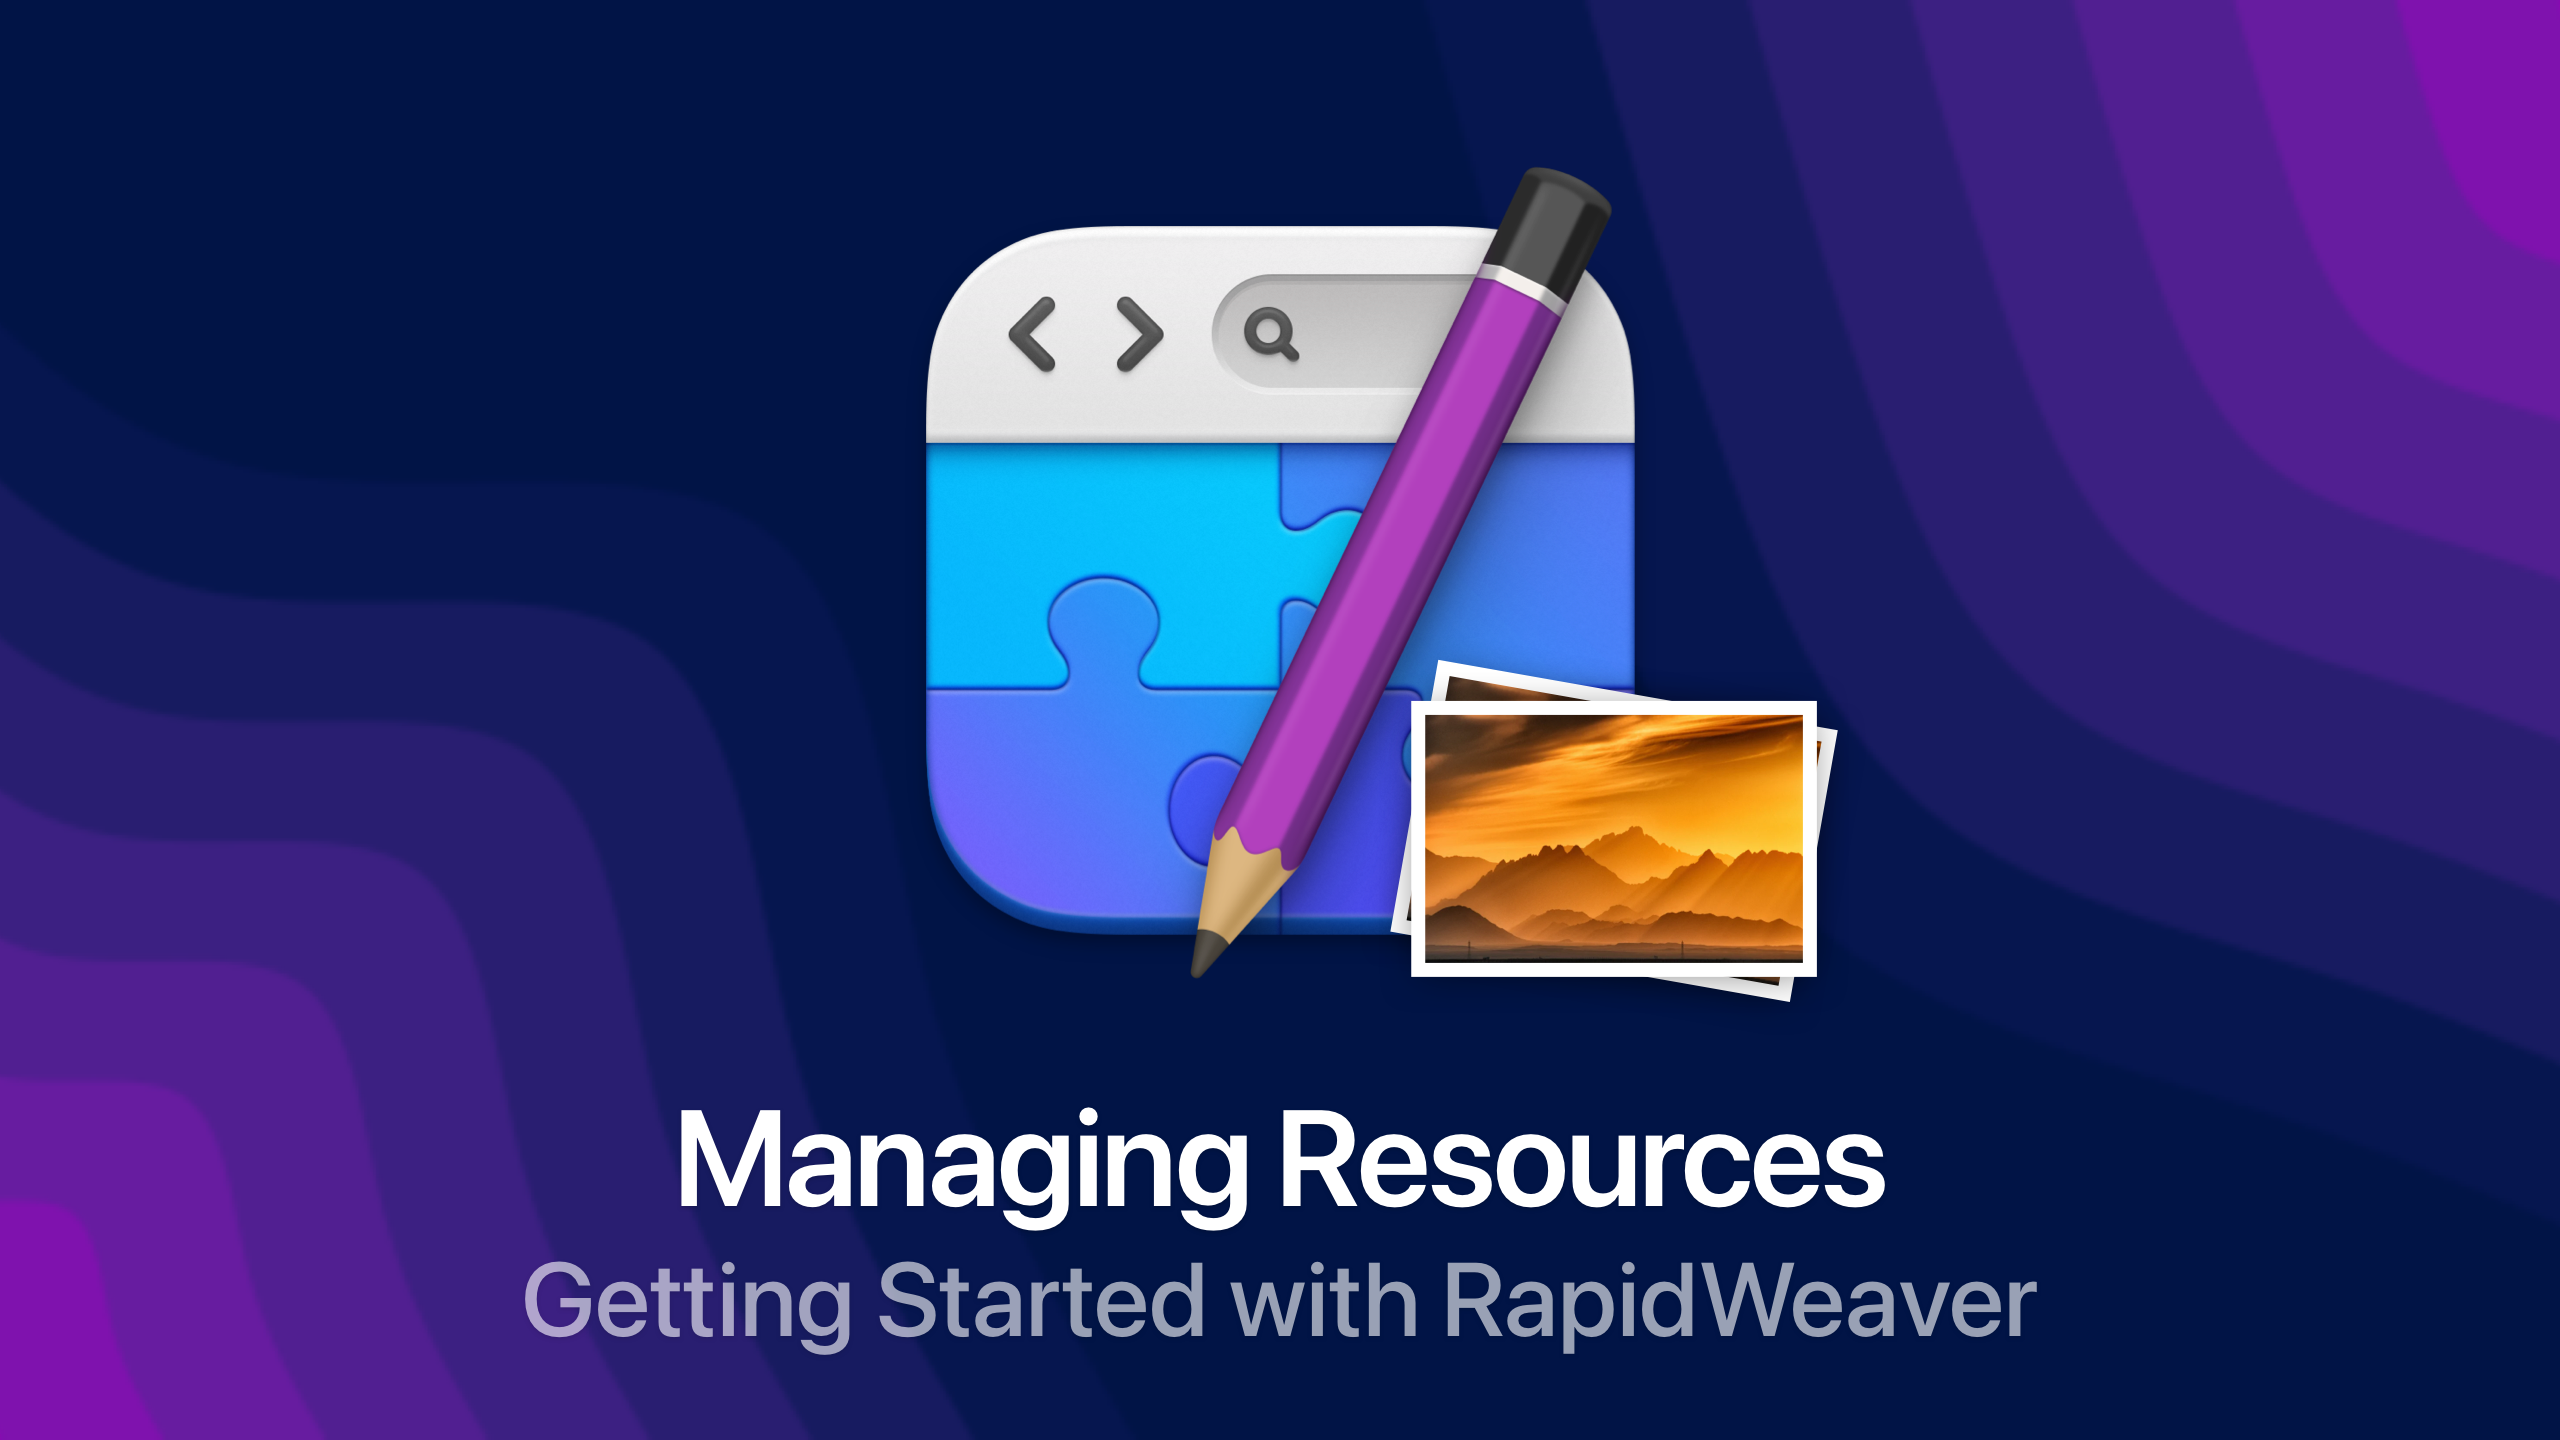 Getting Started with Foundry for RapidWeaver and Stacks